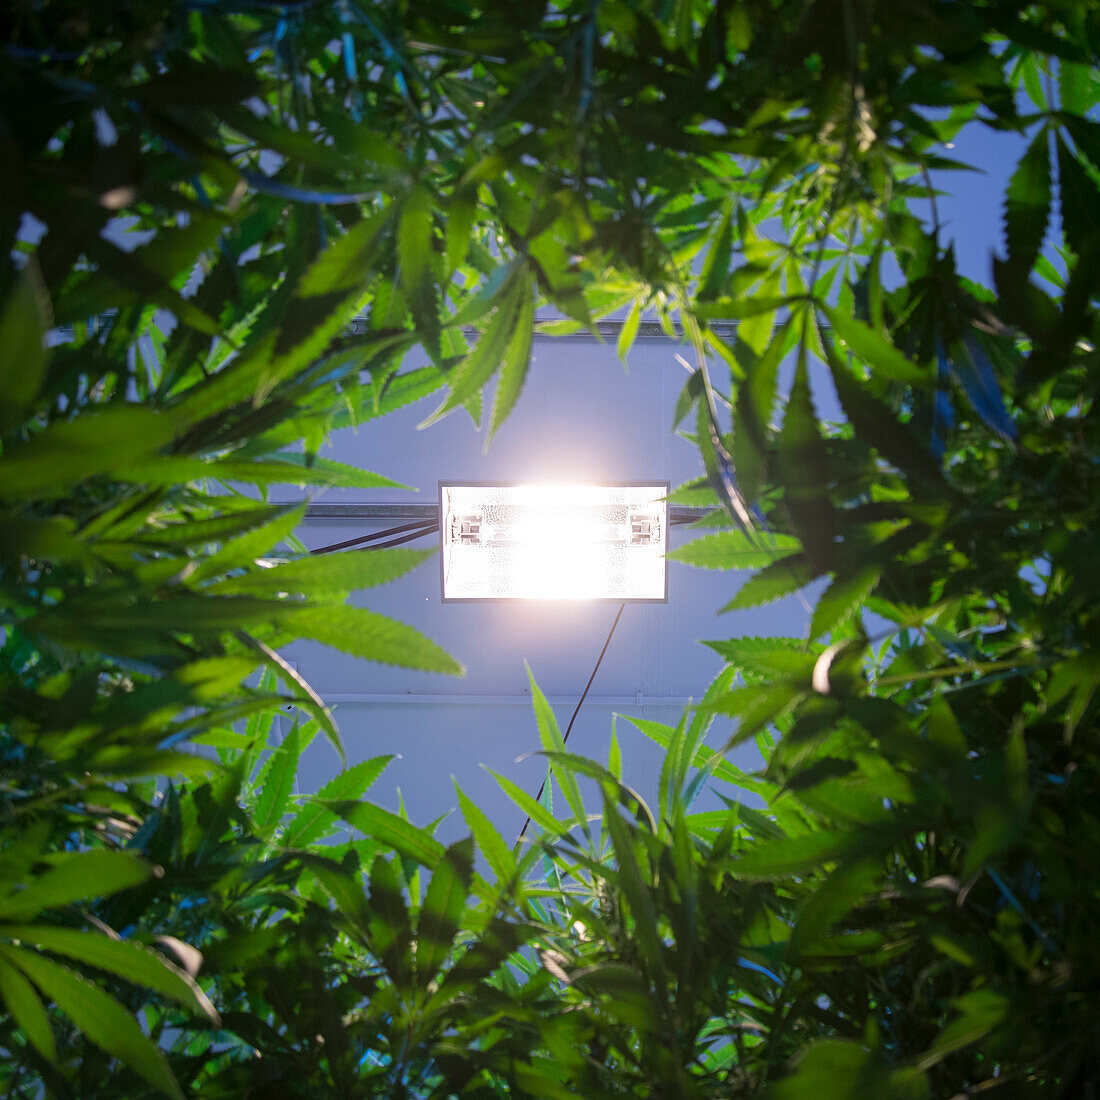 Denver, Colorado- Looking up through the canopy of a Rx Green Solutions medical marijuana grow room using high-powered lighting